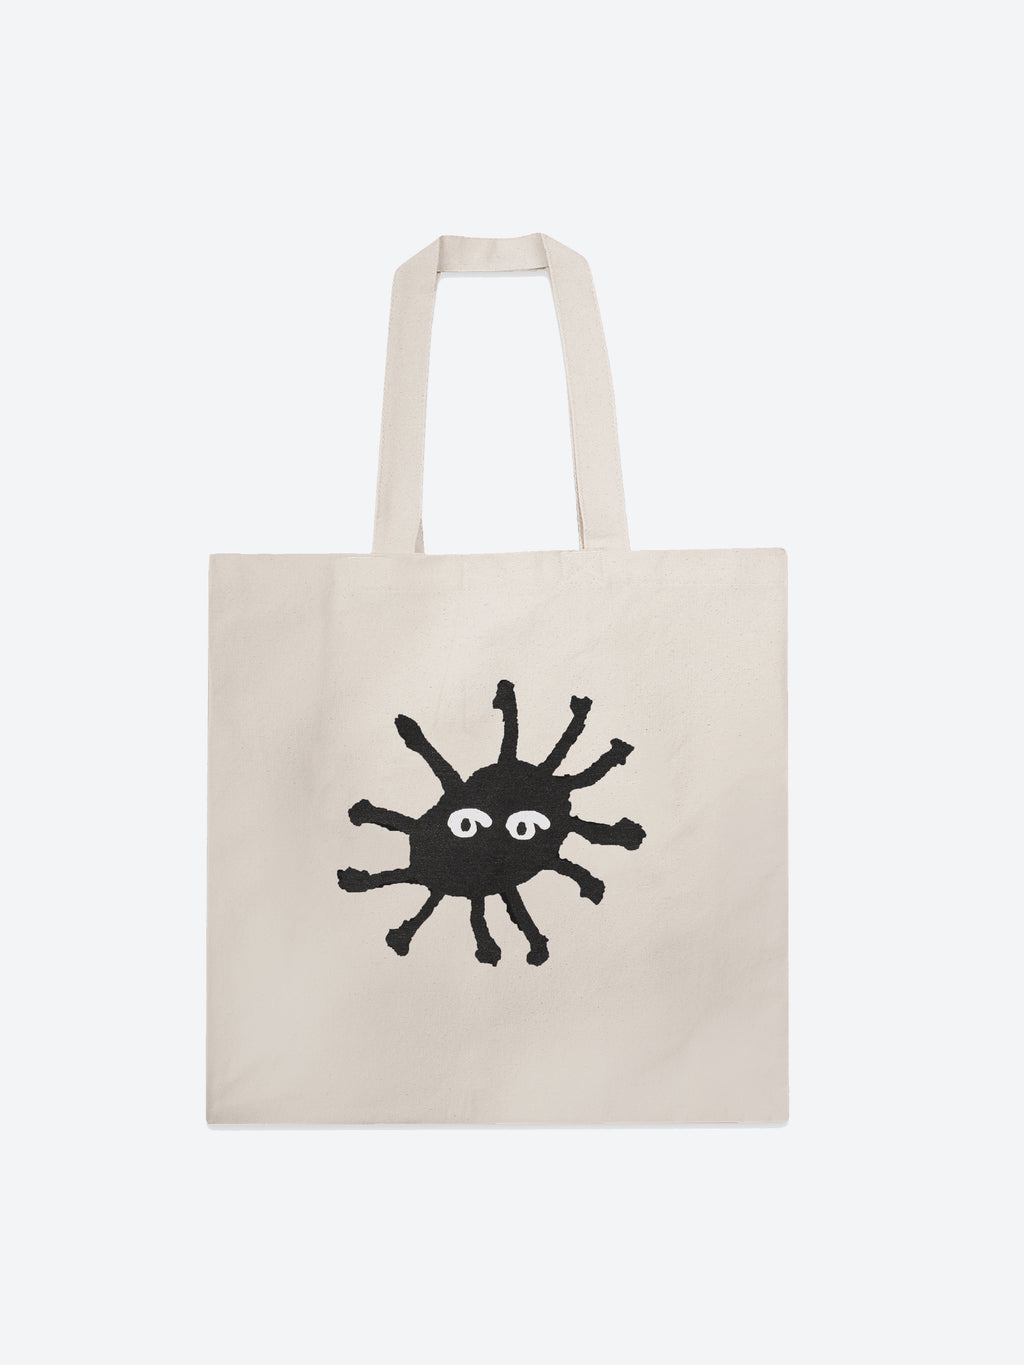 Independent Thought: Tote - Natural